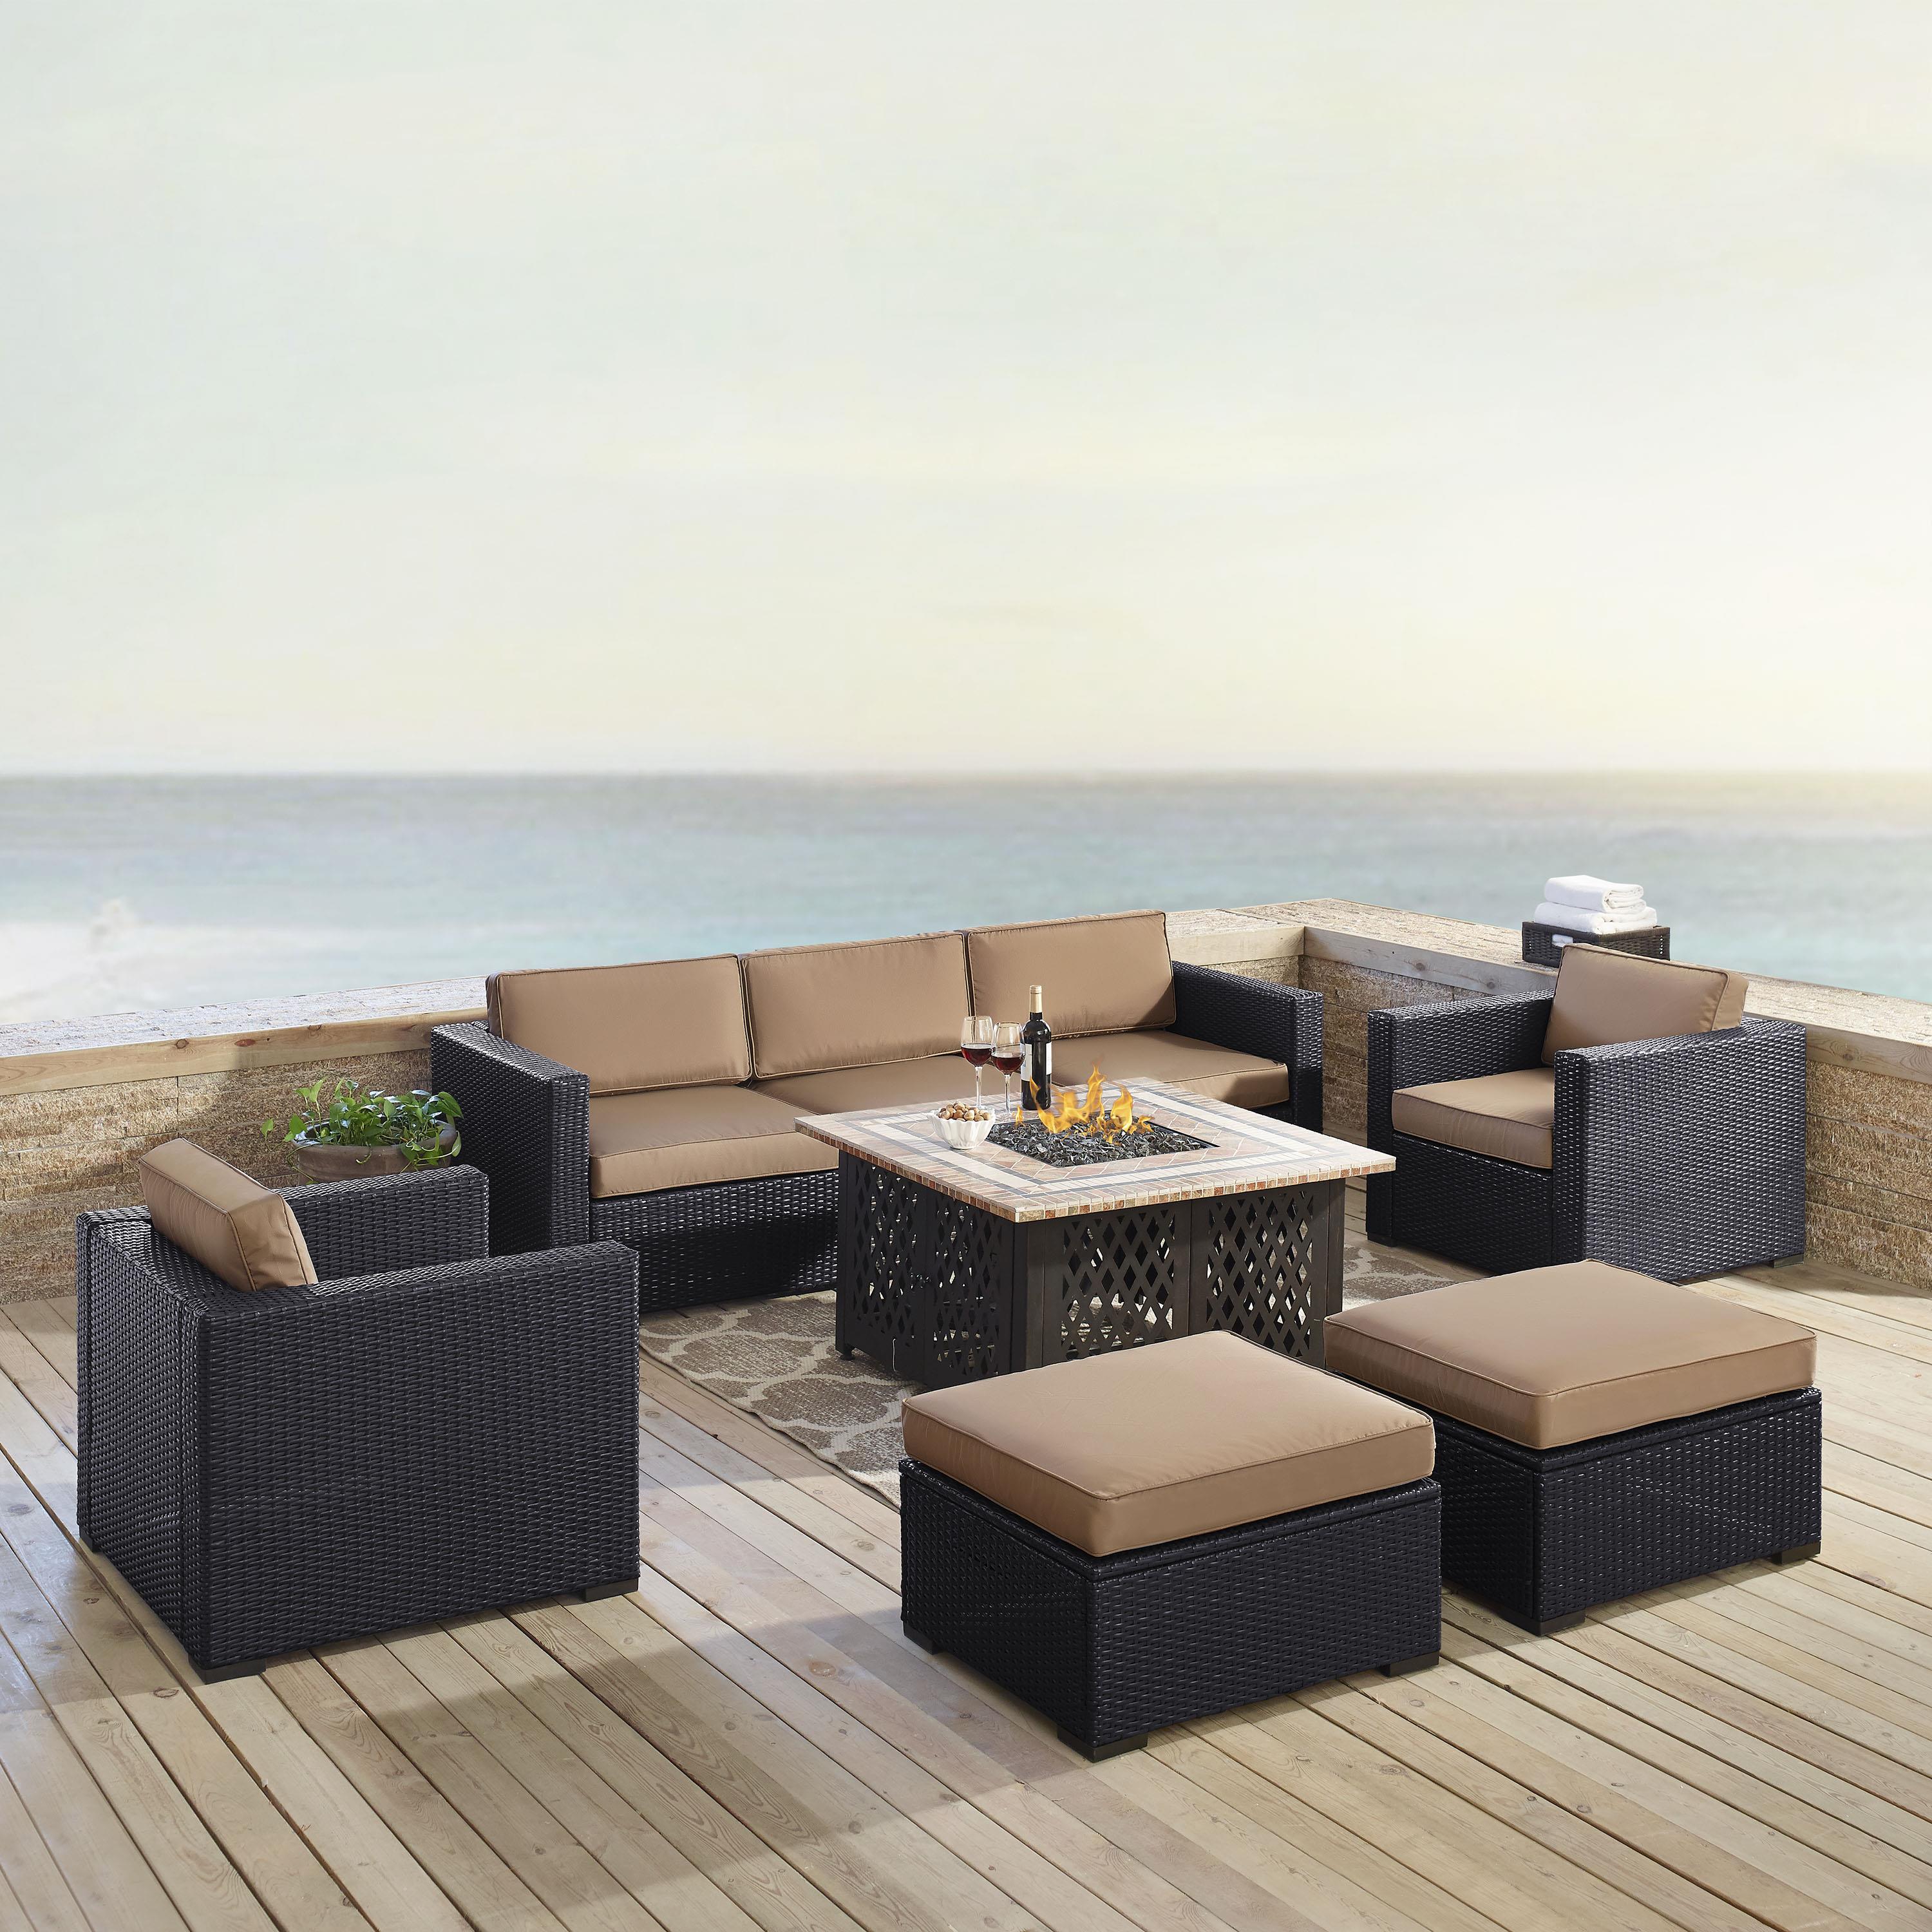 Crosley Furniture Biscayne 7 Piece Metal Patio Fire Pit Sofa Set in Brown/Mocha - image 4 of 4